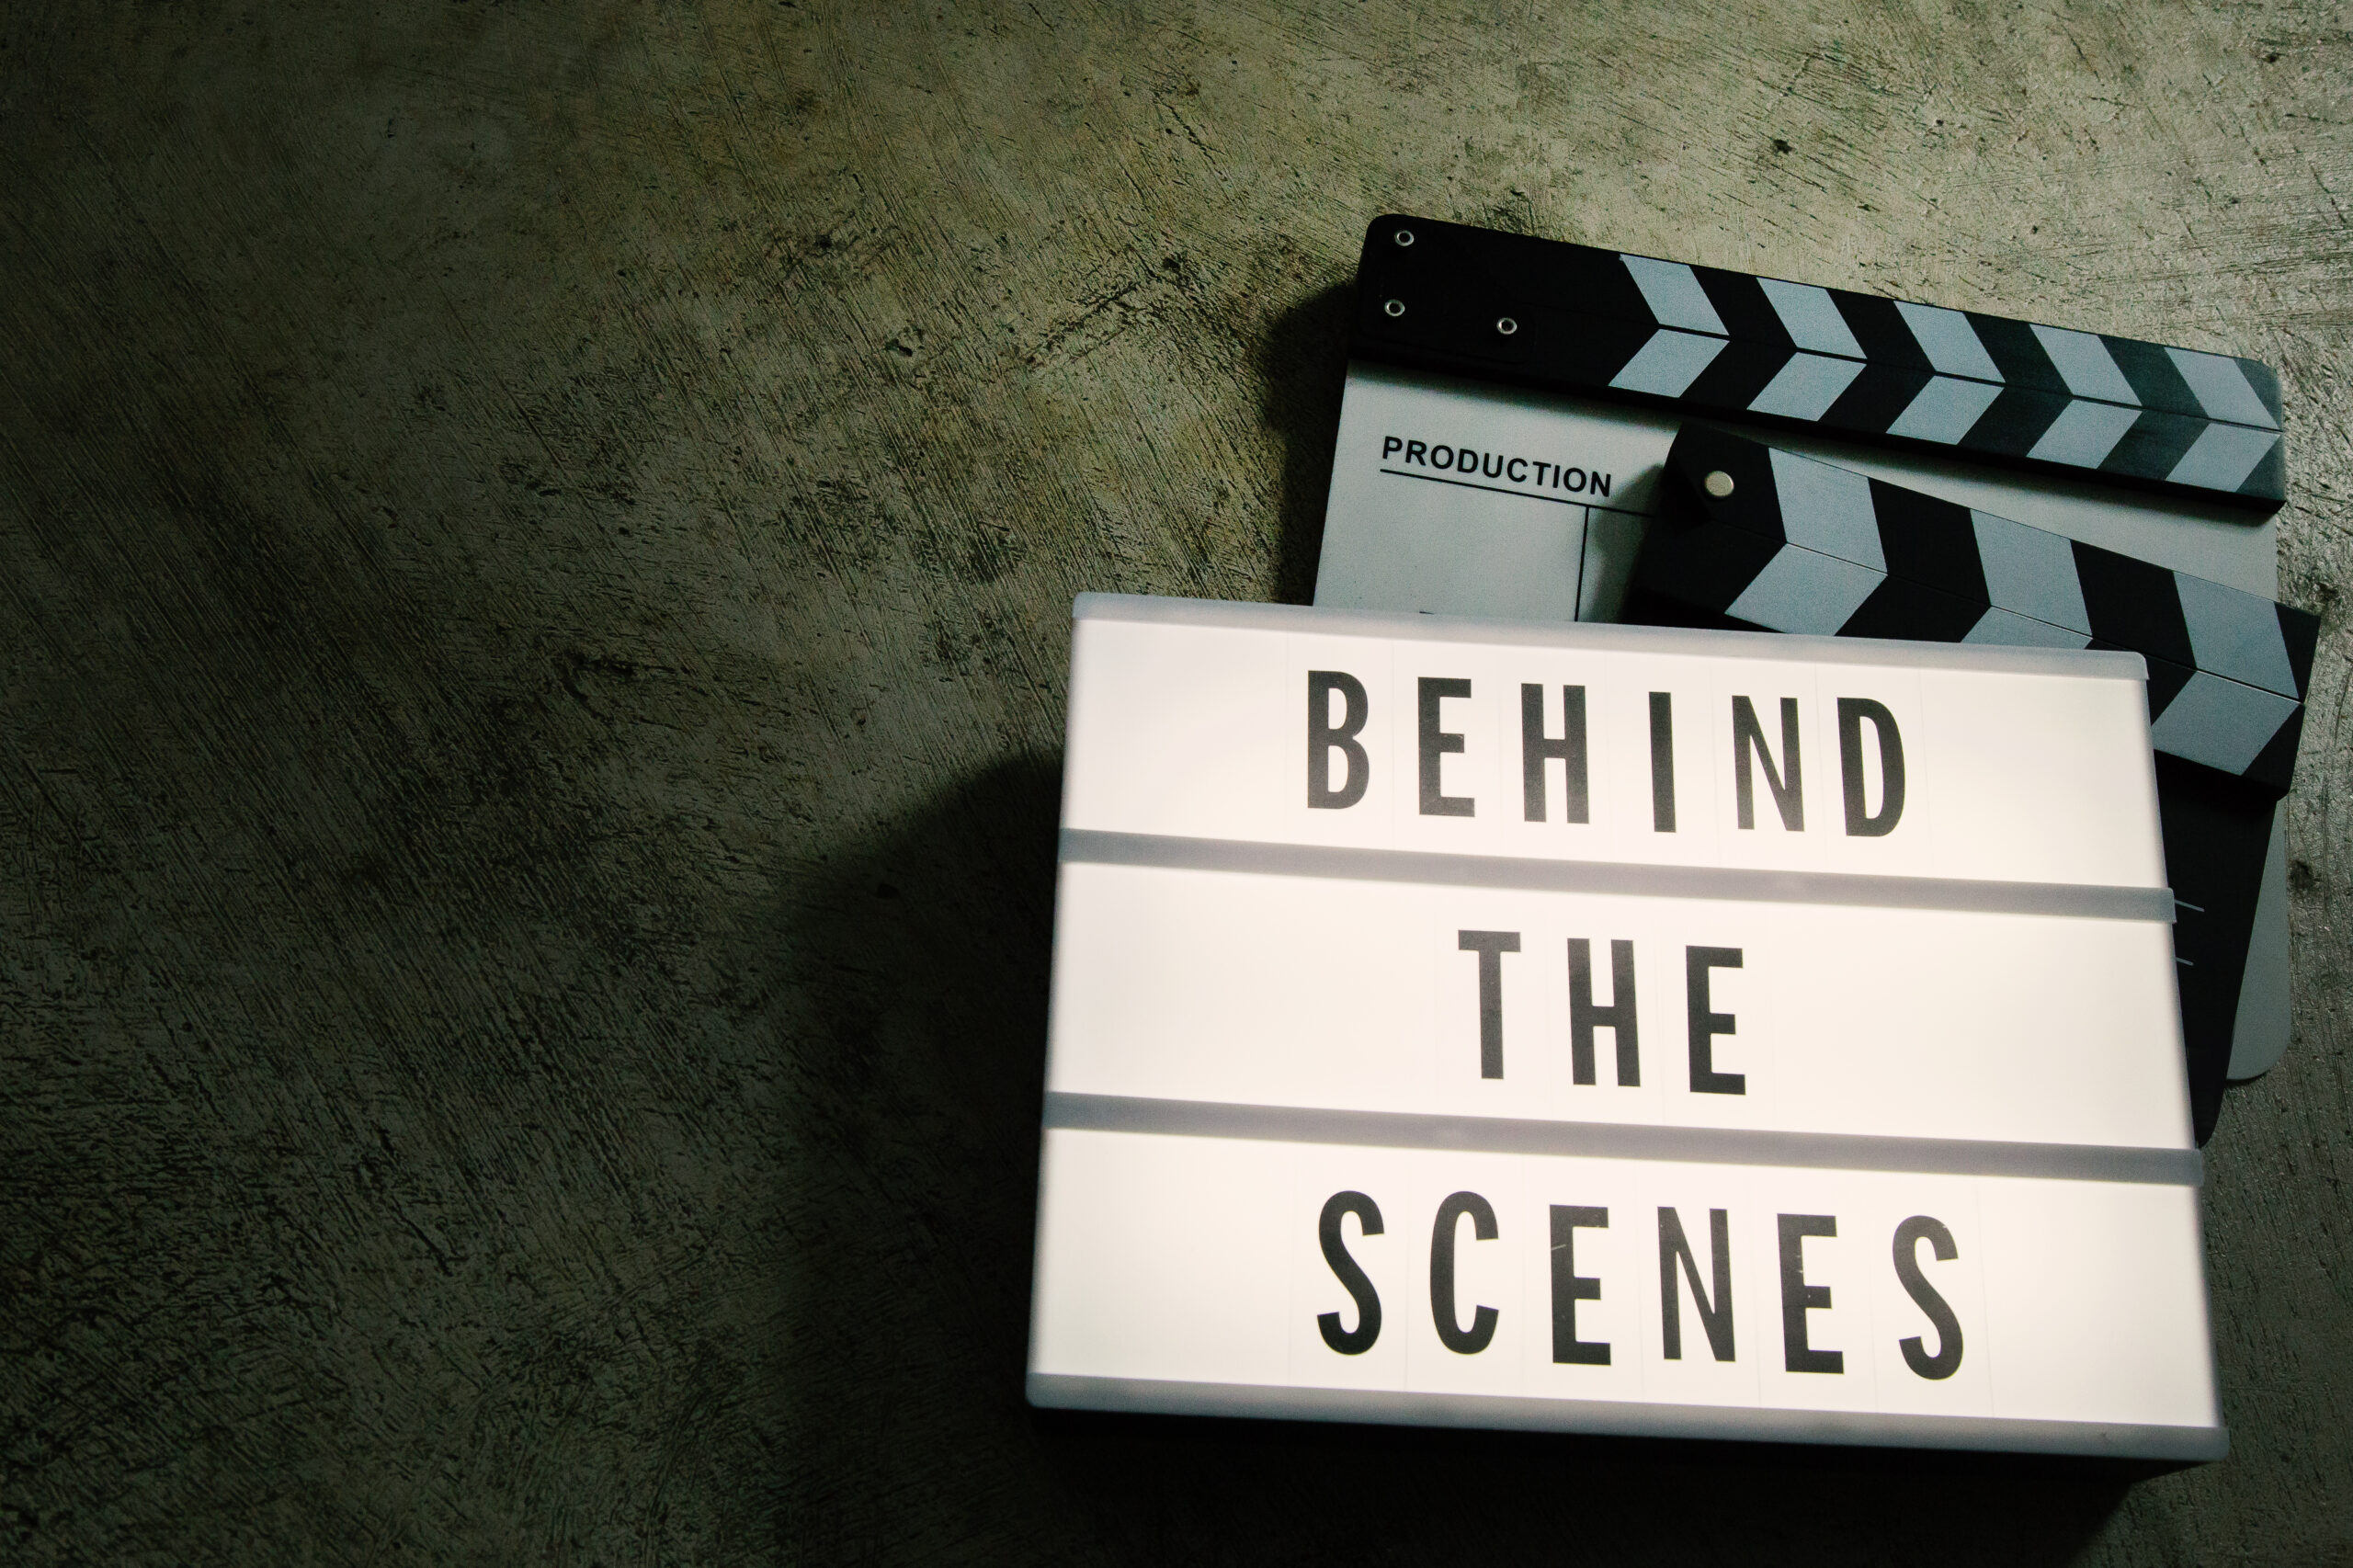 The text, "Behind the scenes